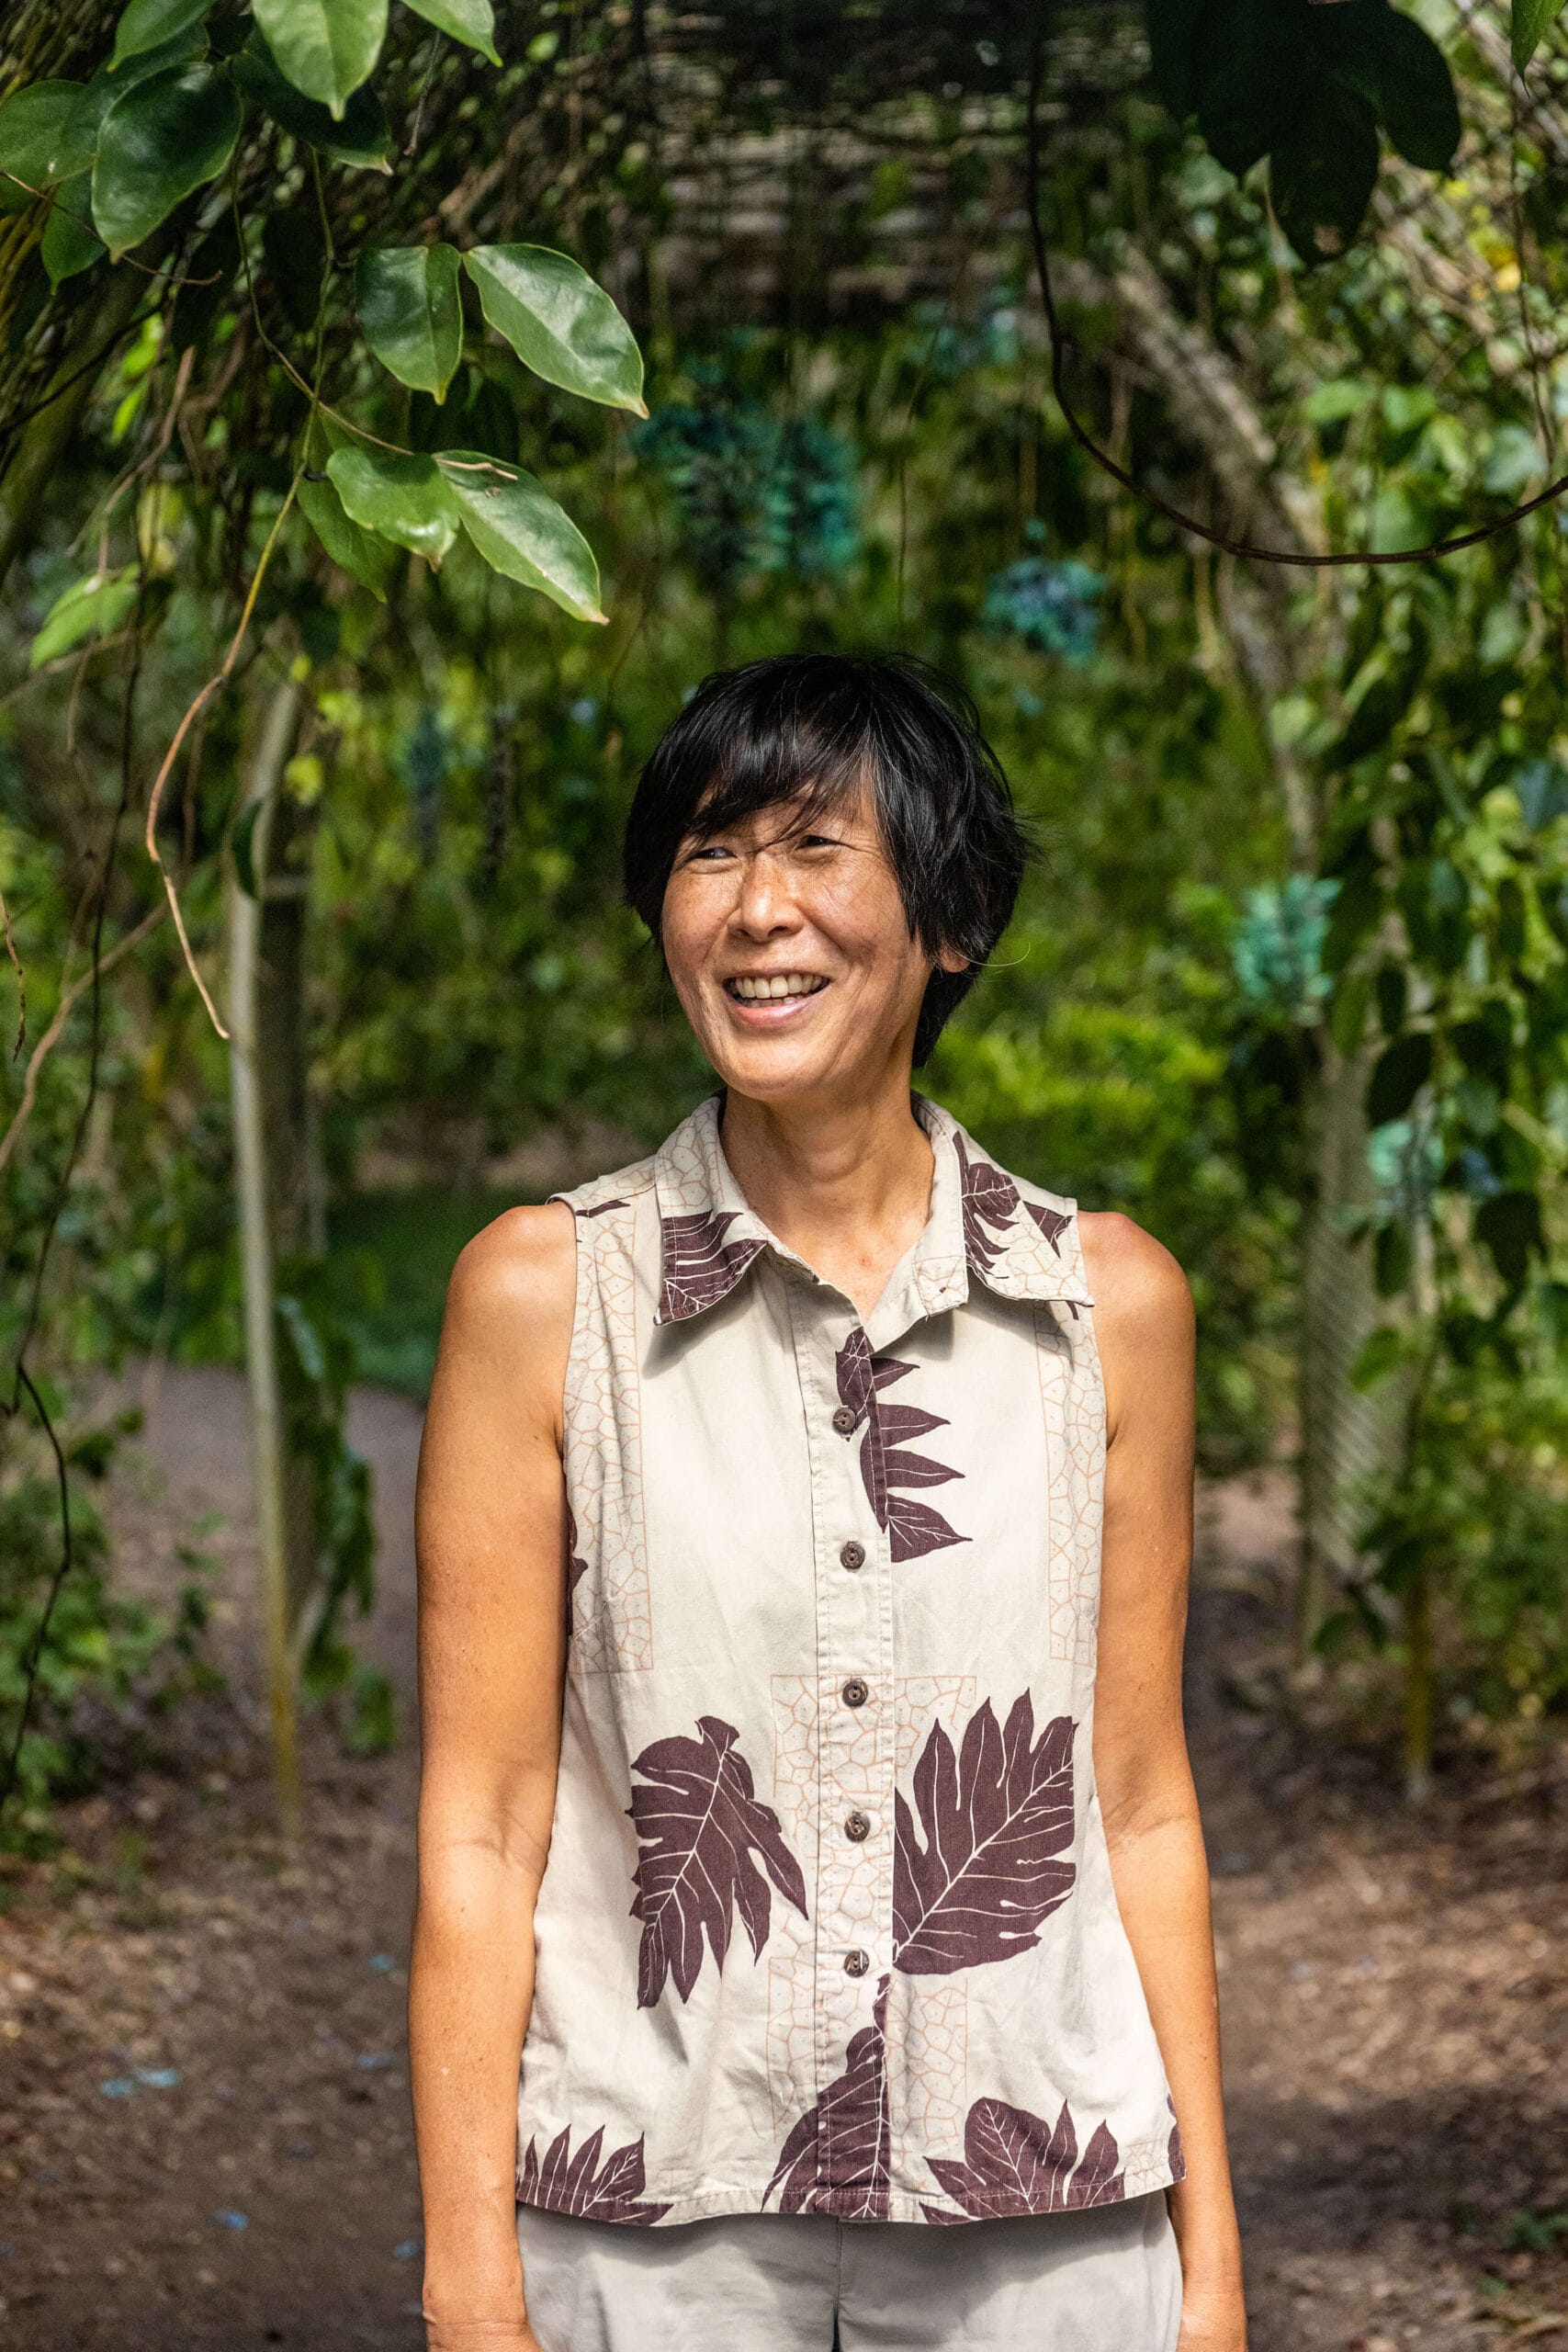 An asian woman smiling in front of an arboretum.